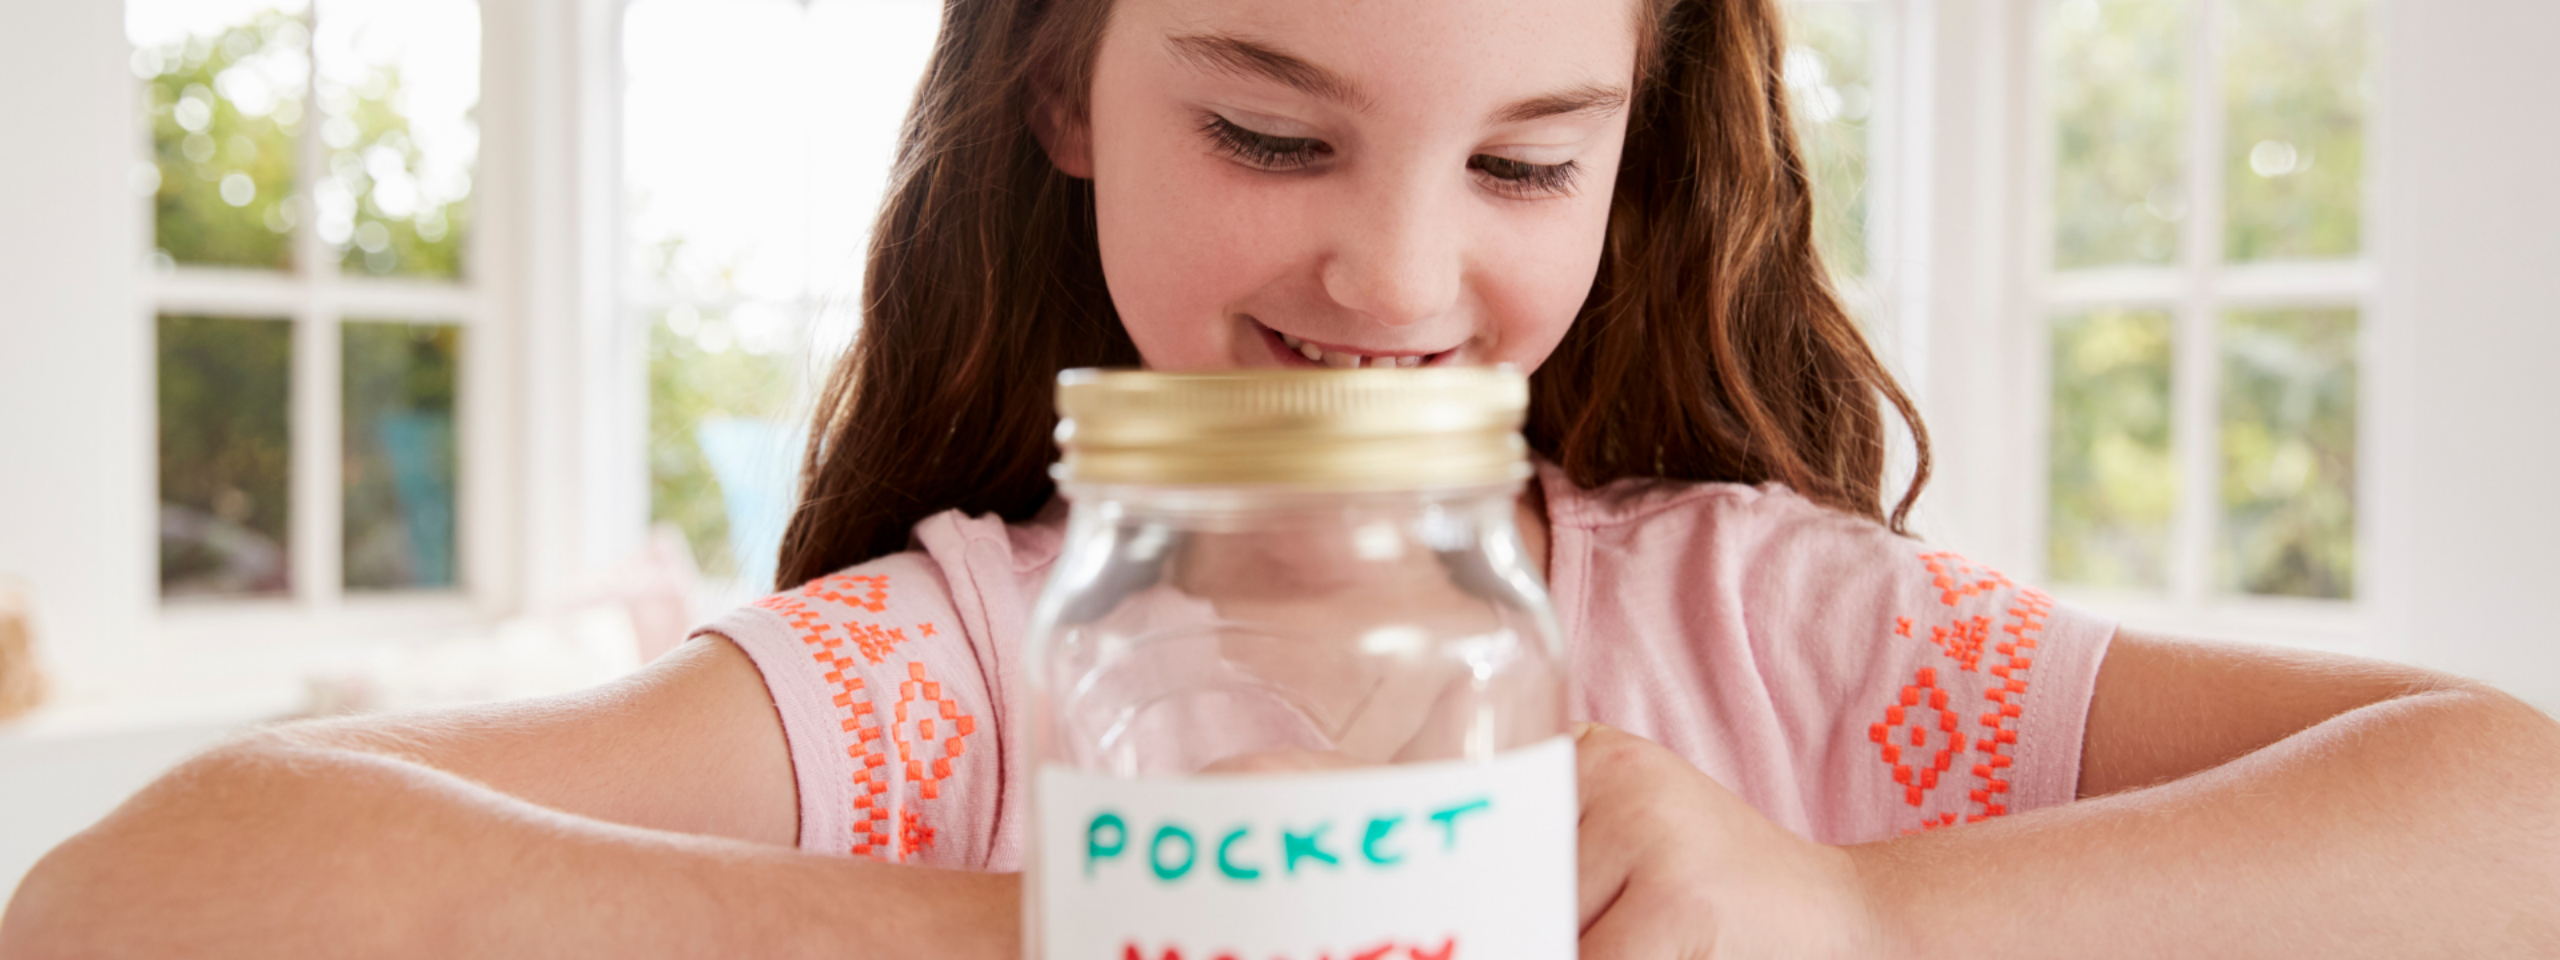 Xentum | How much pocket money should I give my kids?